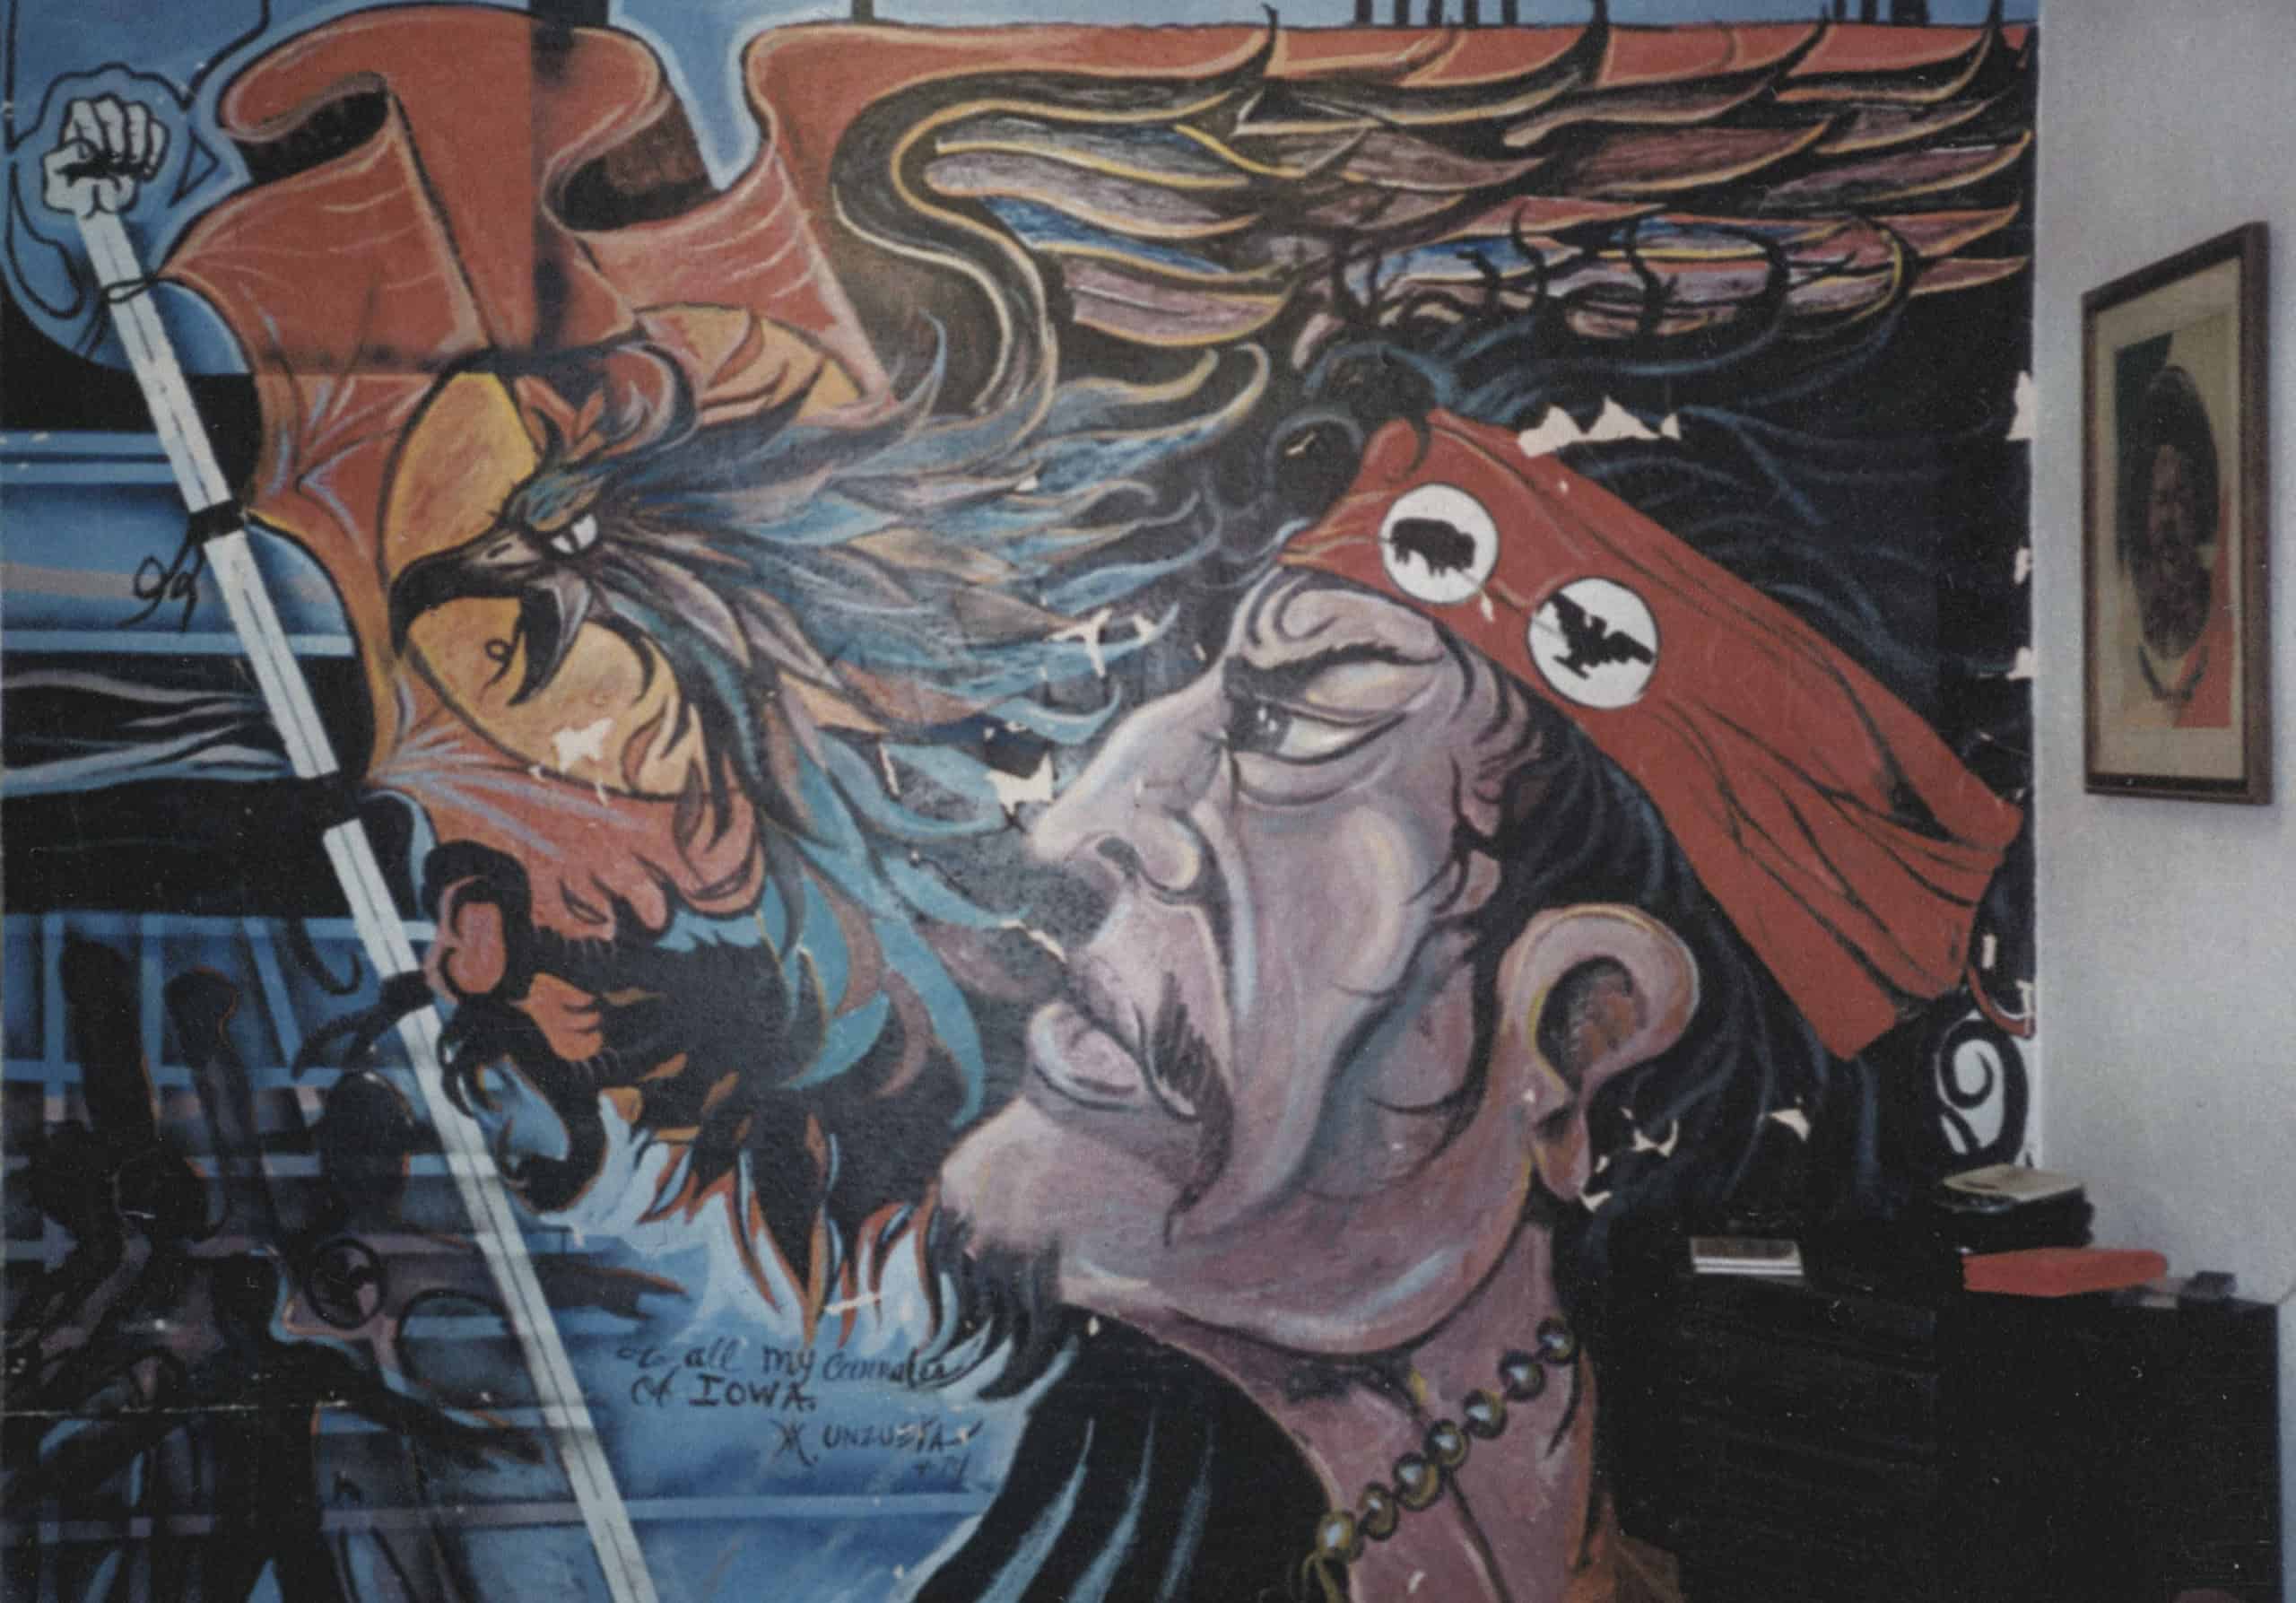 Original mural showing a Latinx man looking forward with determination. A flag and eagle are next to him, and he wears a headband that represents both Latino and Native American causes.